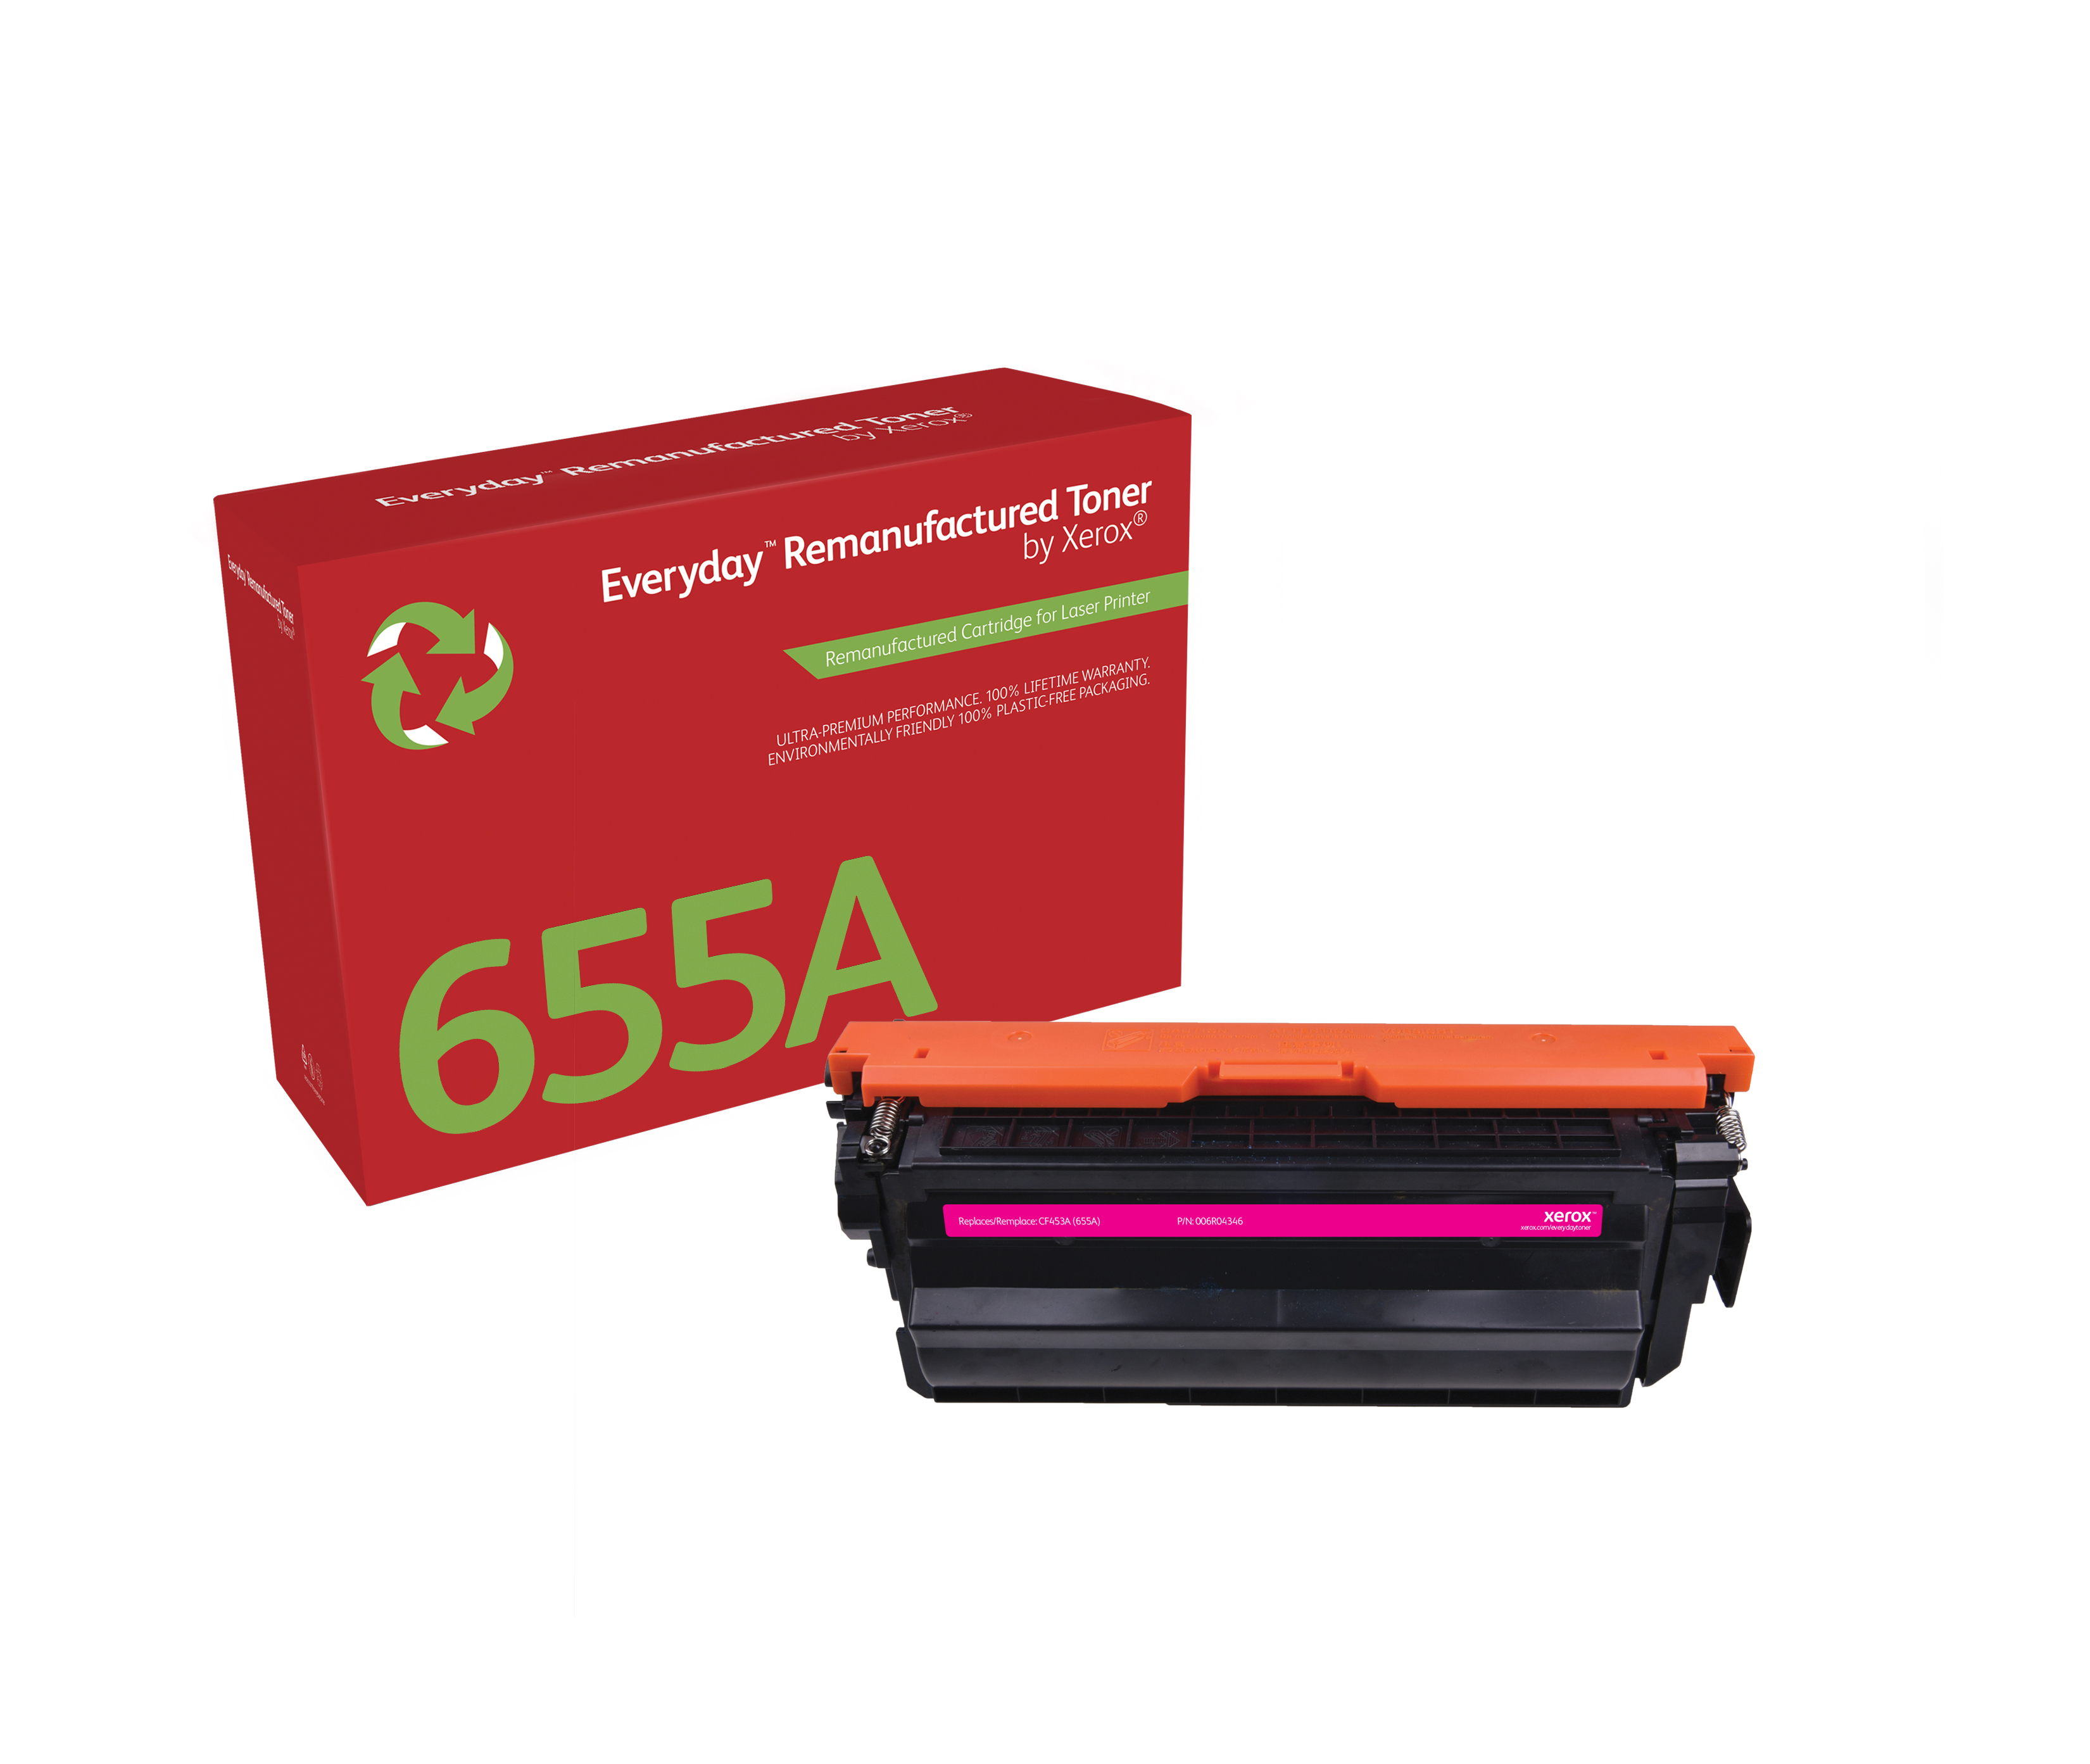 Everyday Magenta Toner compatible with HP 655A (CF453A), Standard Yield  006R04346 by Xerox